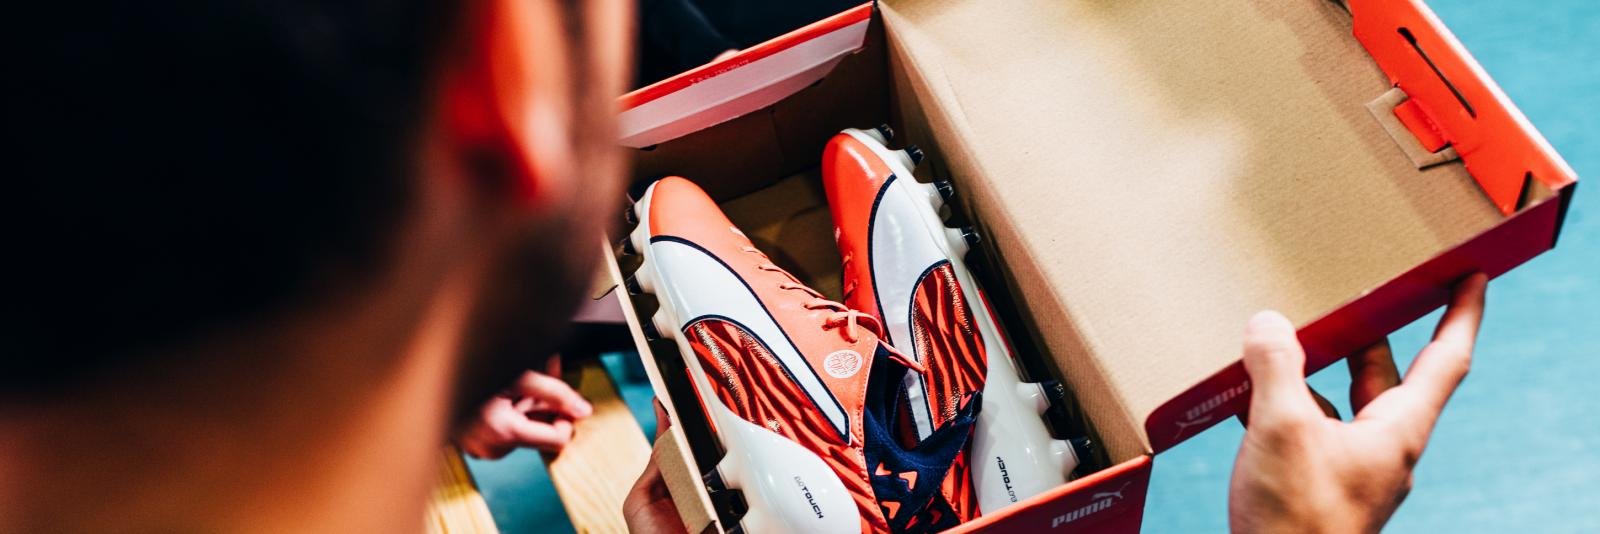 Arsenal ace laces up in PUMA evoTOUCH ‘Derby Fever’ boots ahead of North London derby